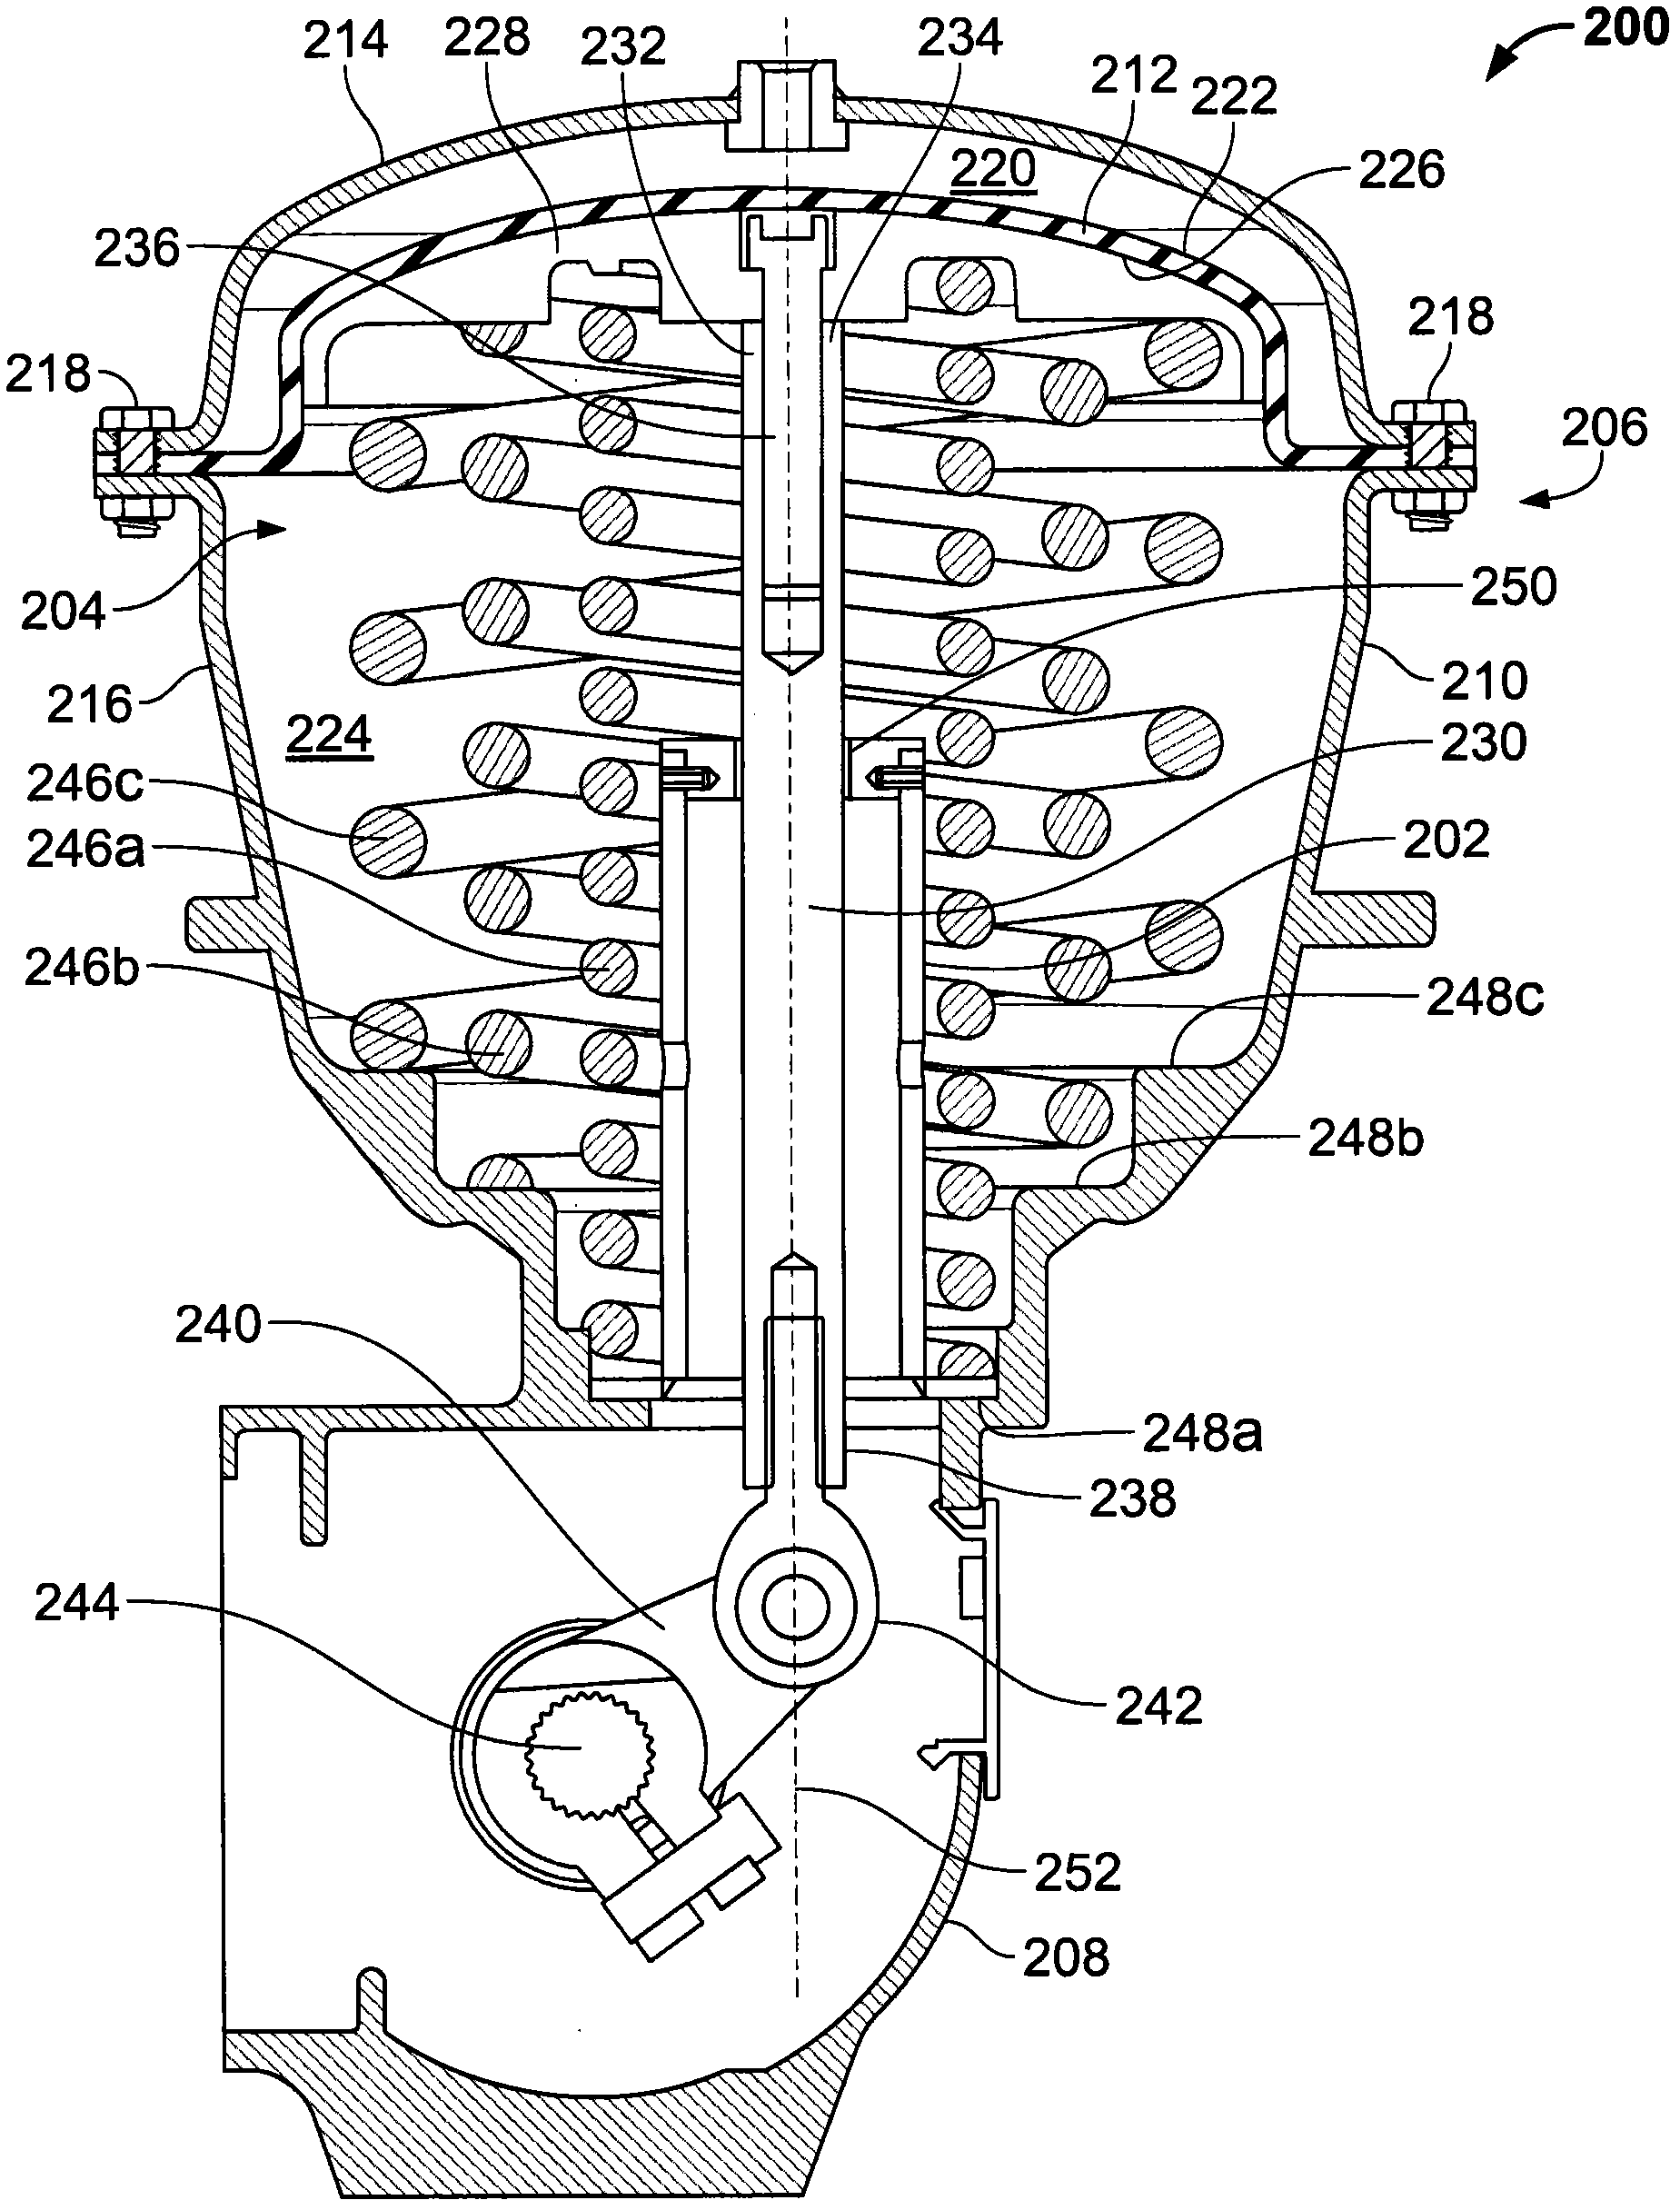 Stem guide apparatus for use with fluid valve actuators